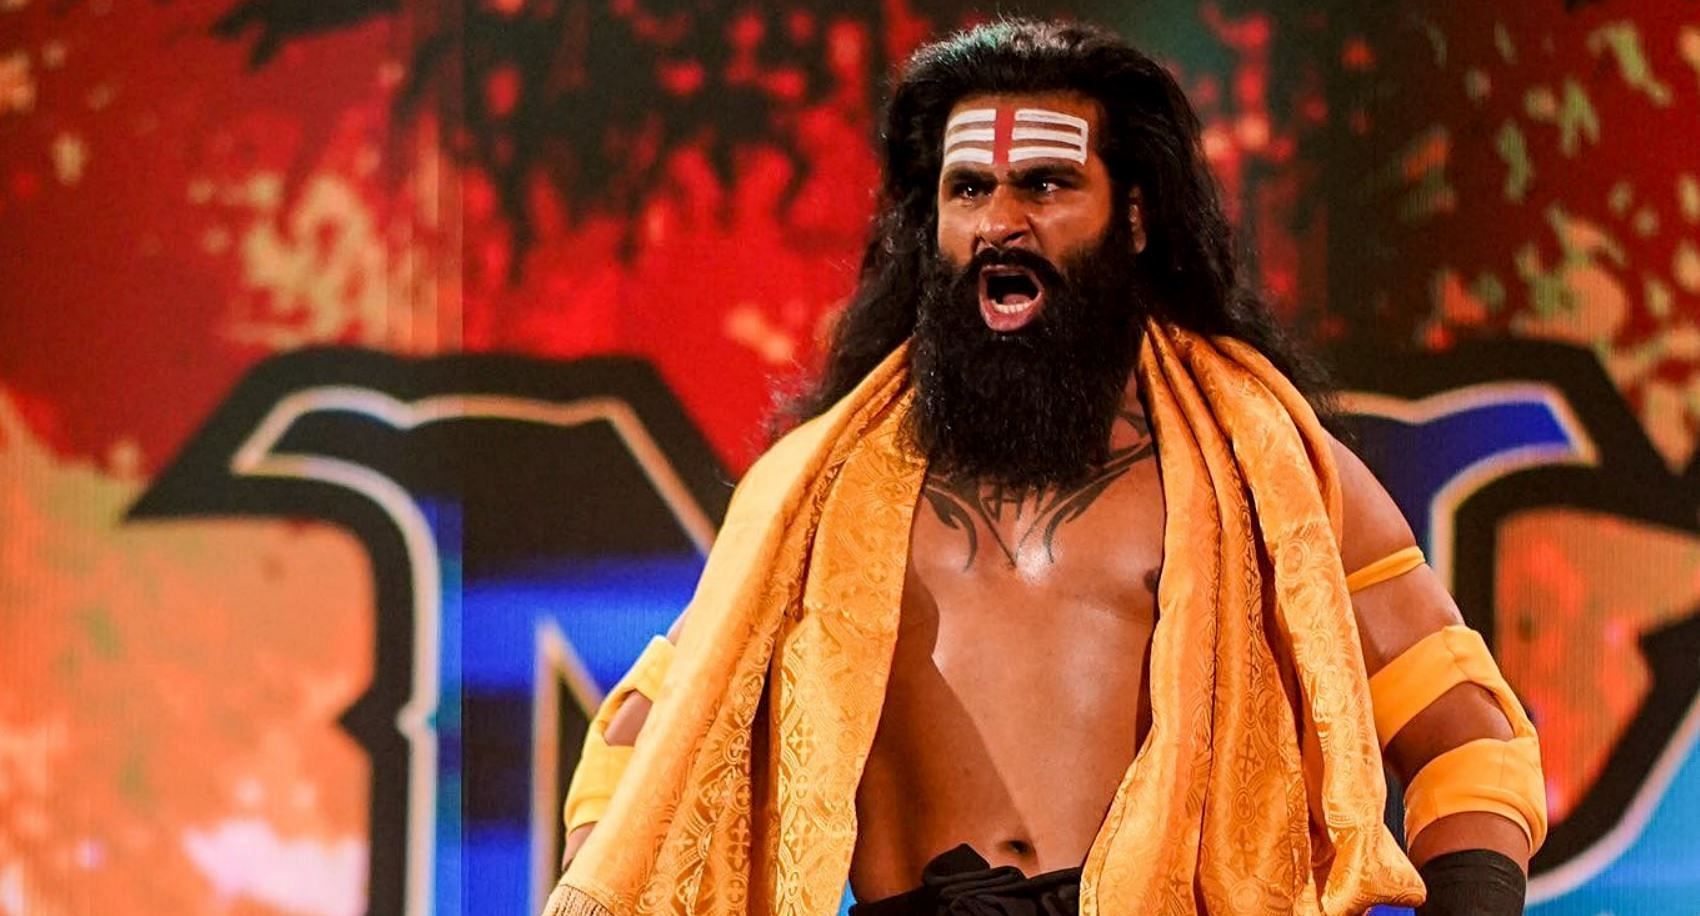 Will Mahaan follow the advice of a WWE official?